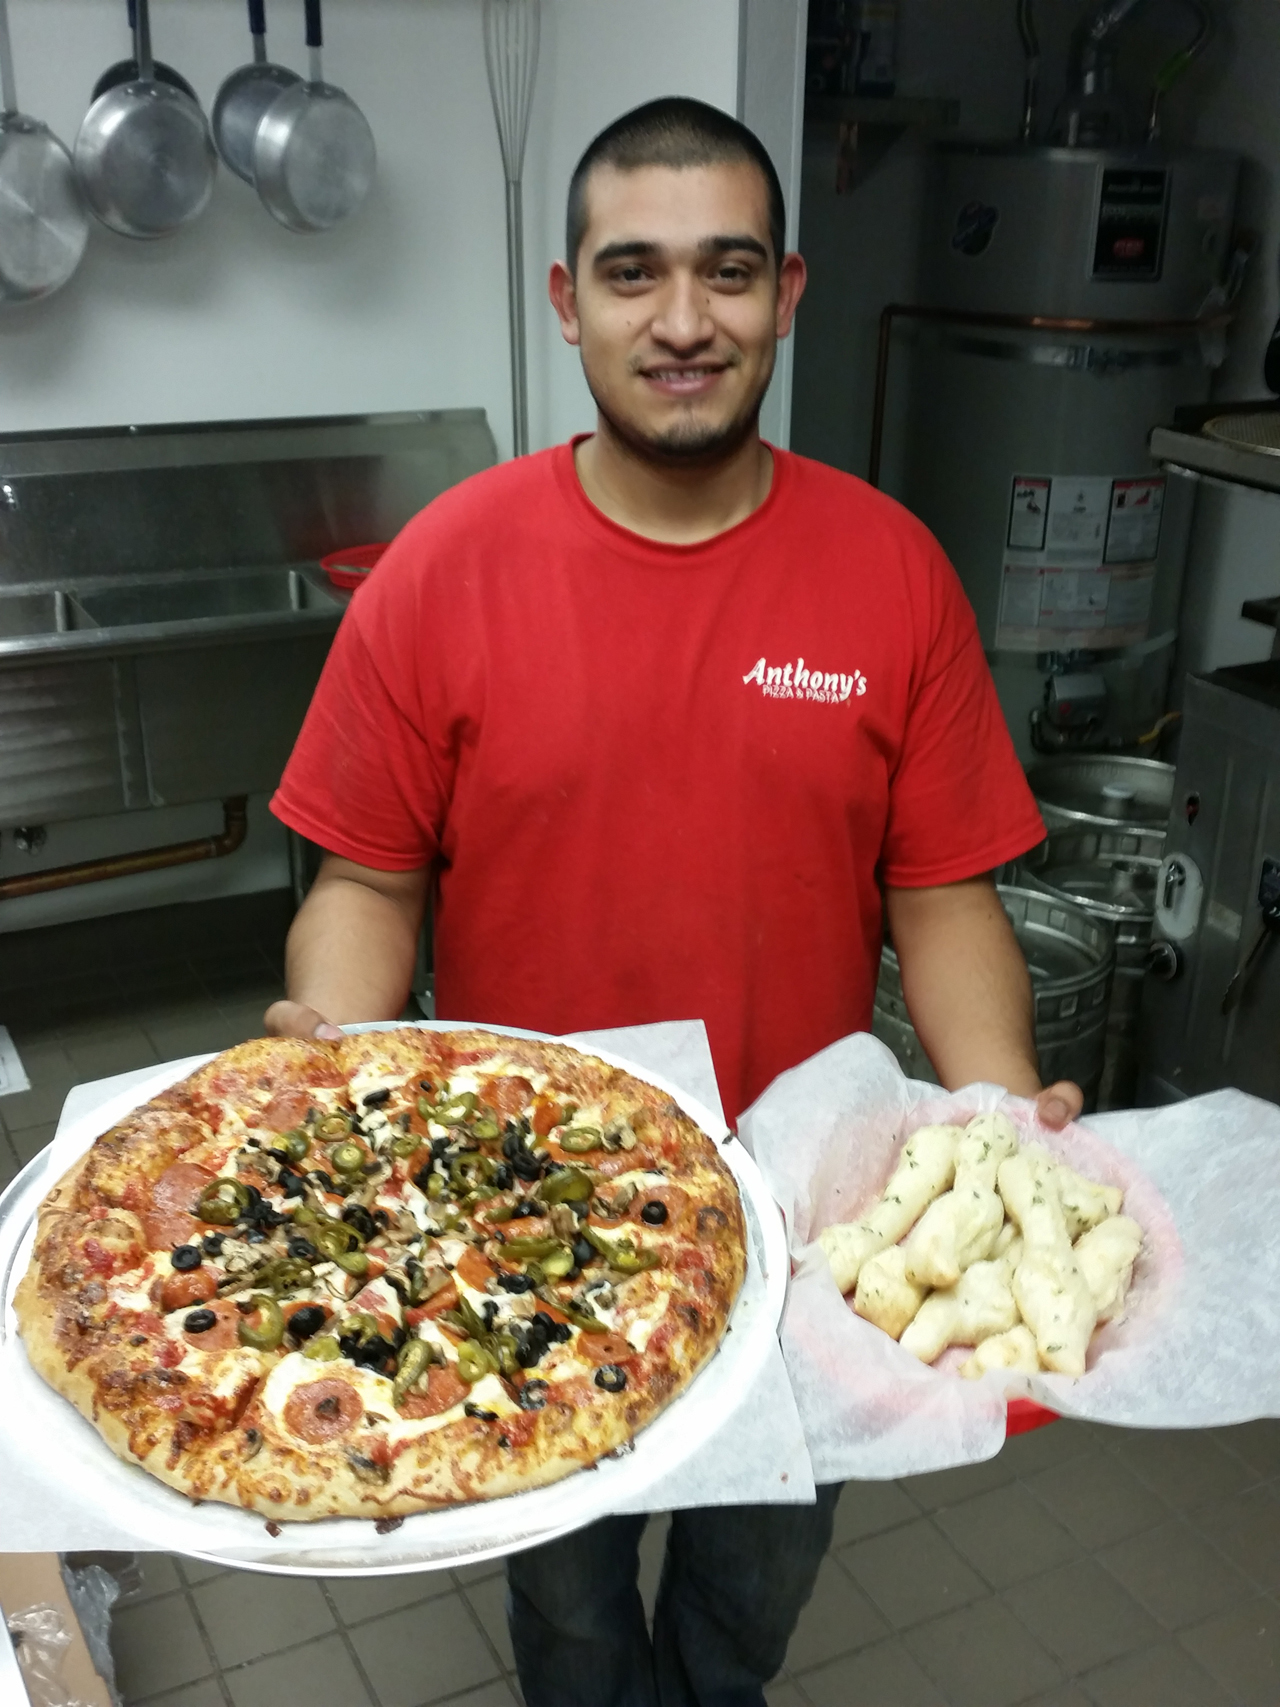 Anthony's Pizza & Pasta staff members in the Corona, CA area